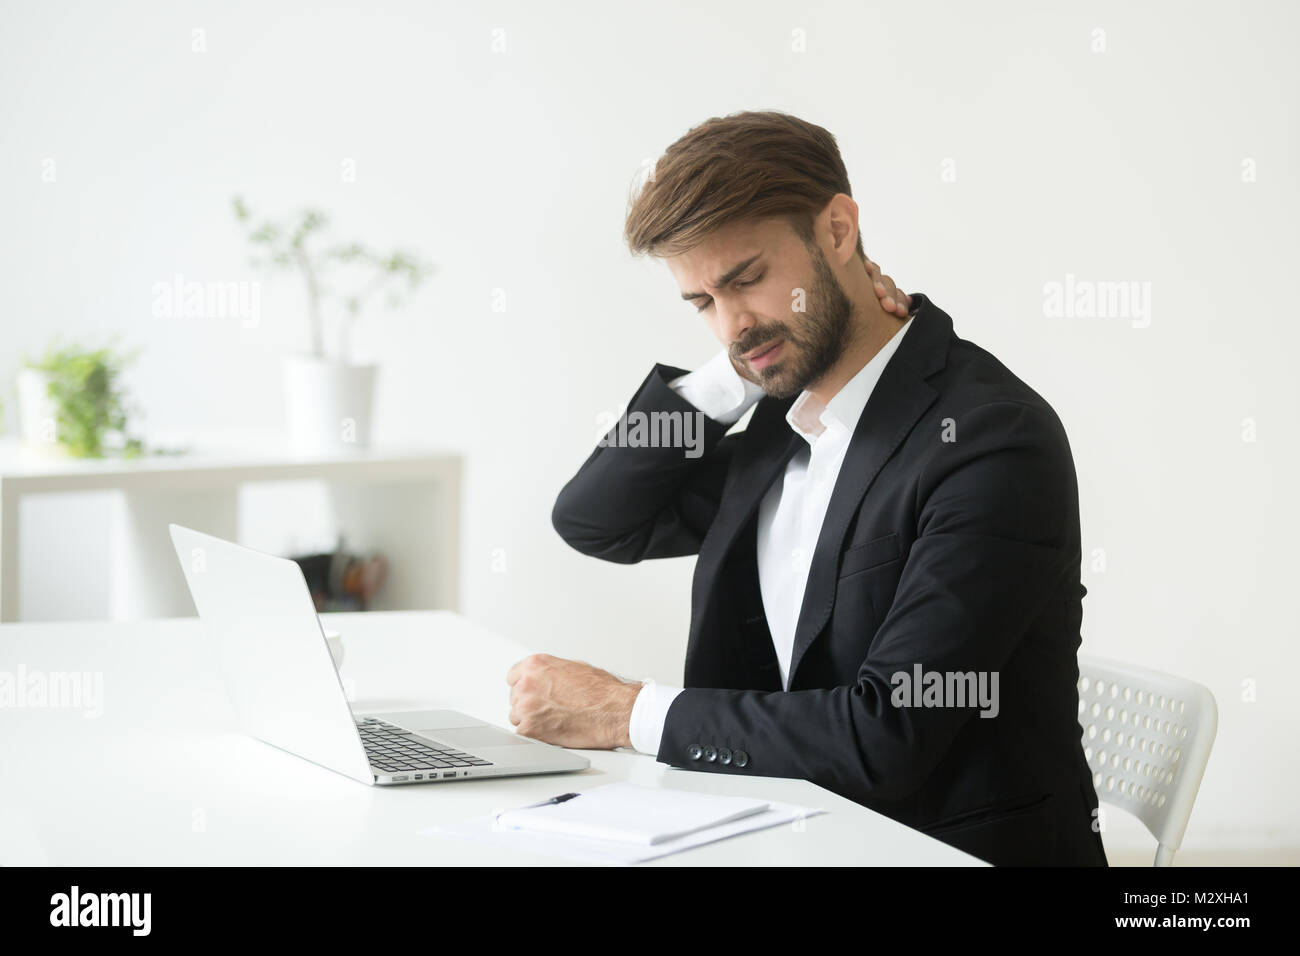 Young businessman in suit feeling neck pain after sedentary work Stock Photo